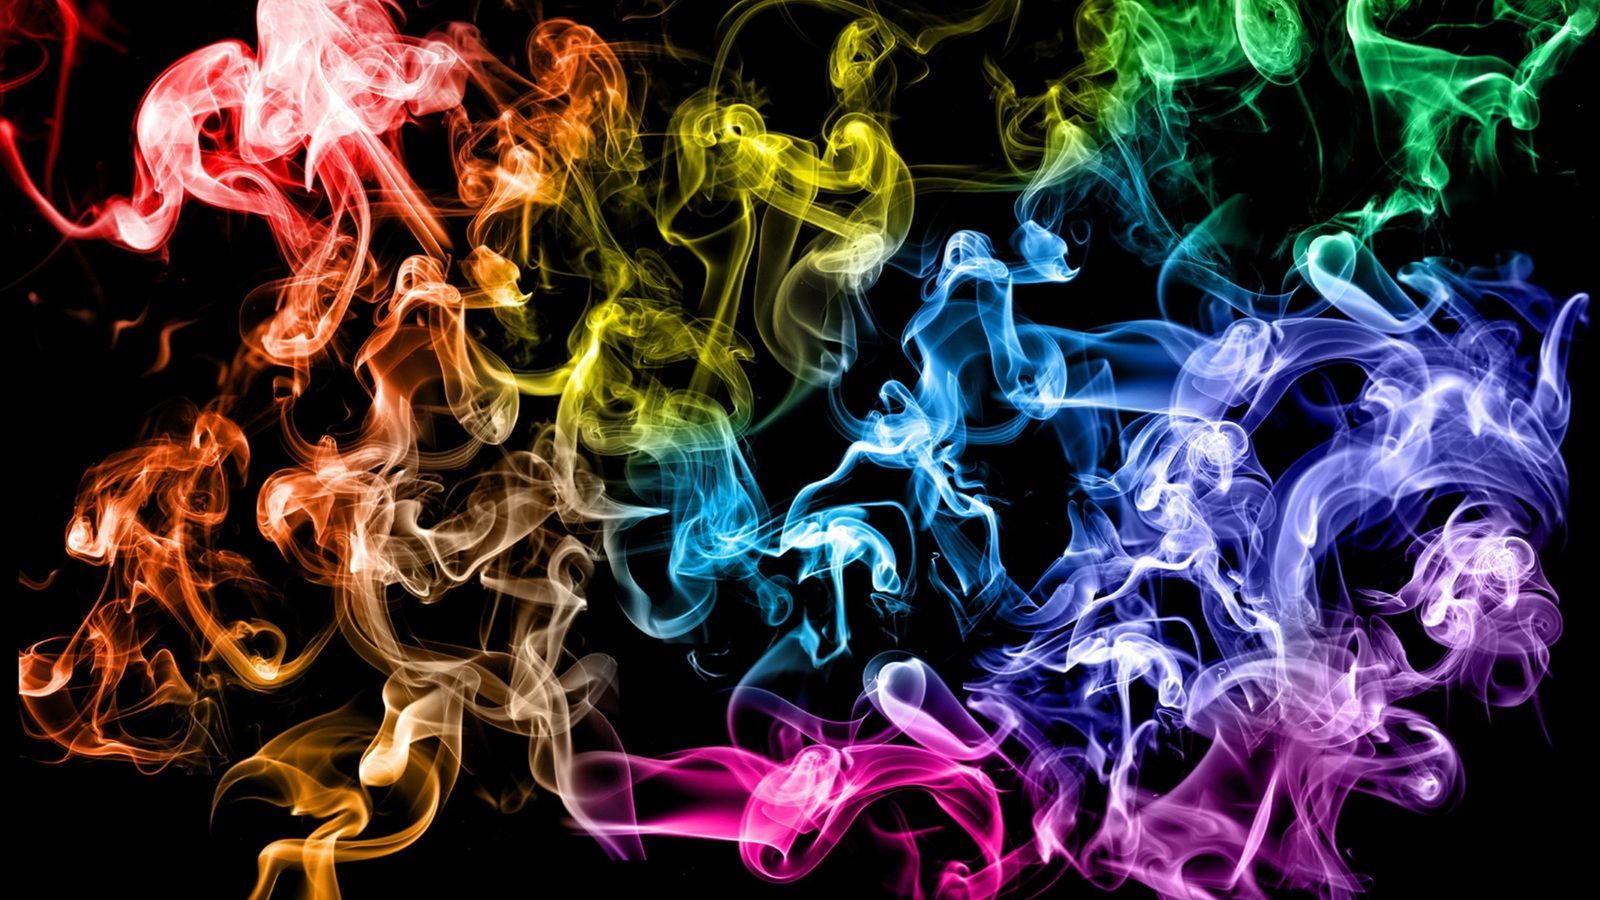 Colored Smoke Rings Wallpaper Full HD Background